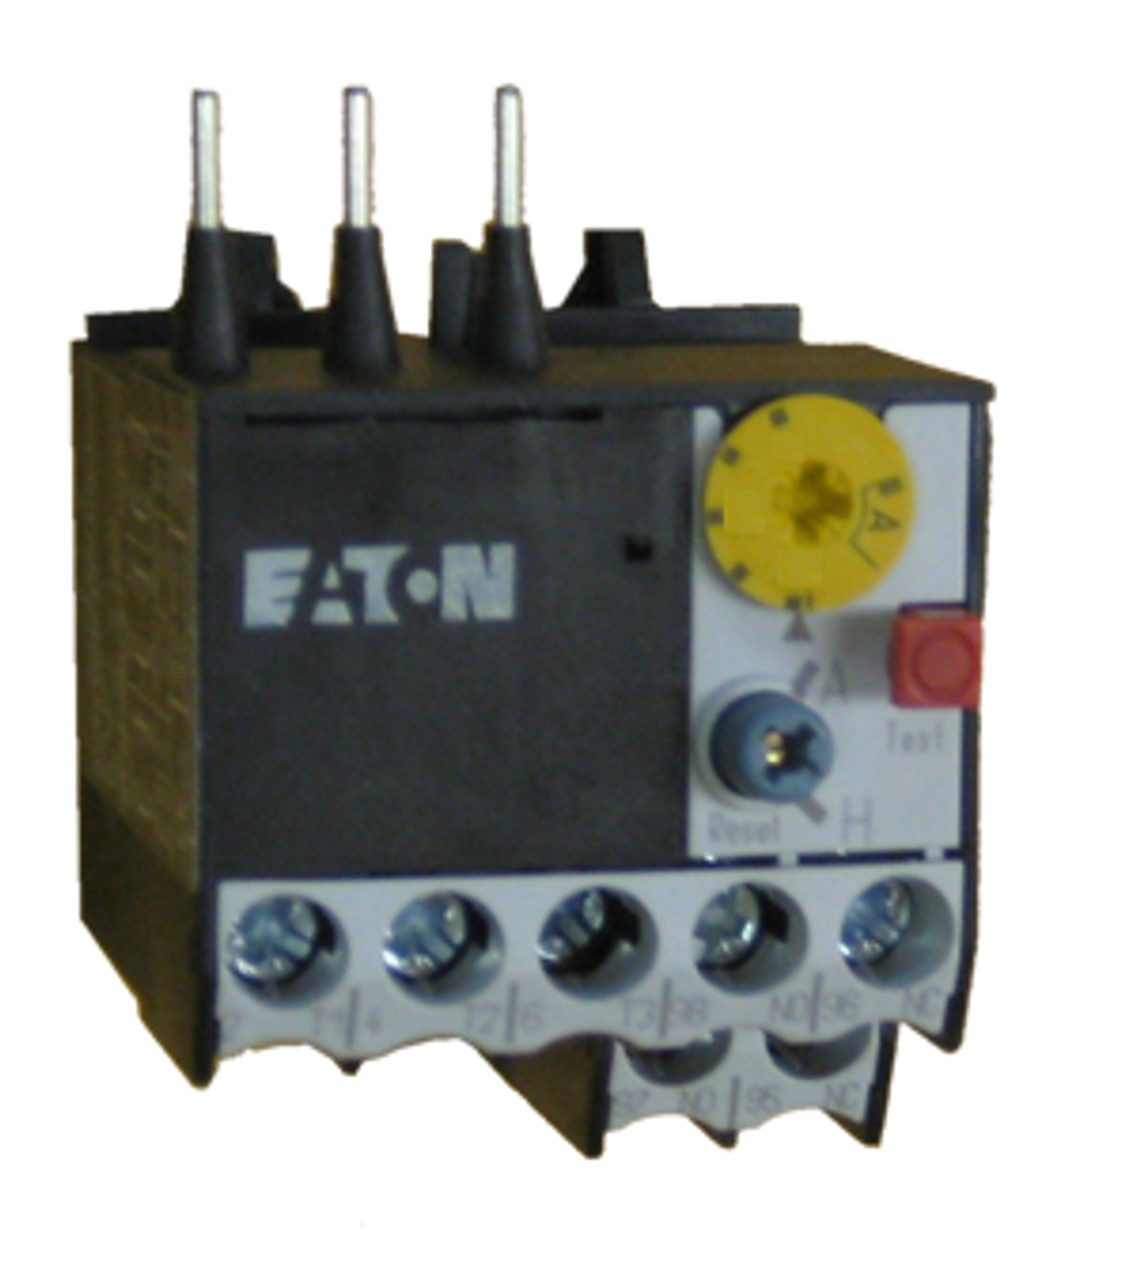 Eaton ZE-1.6 thermal overload